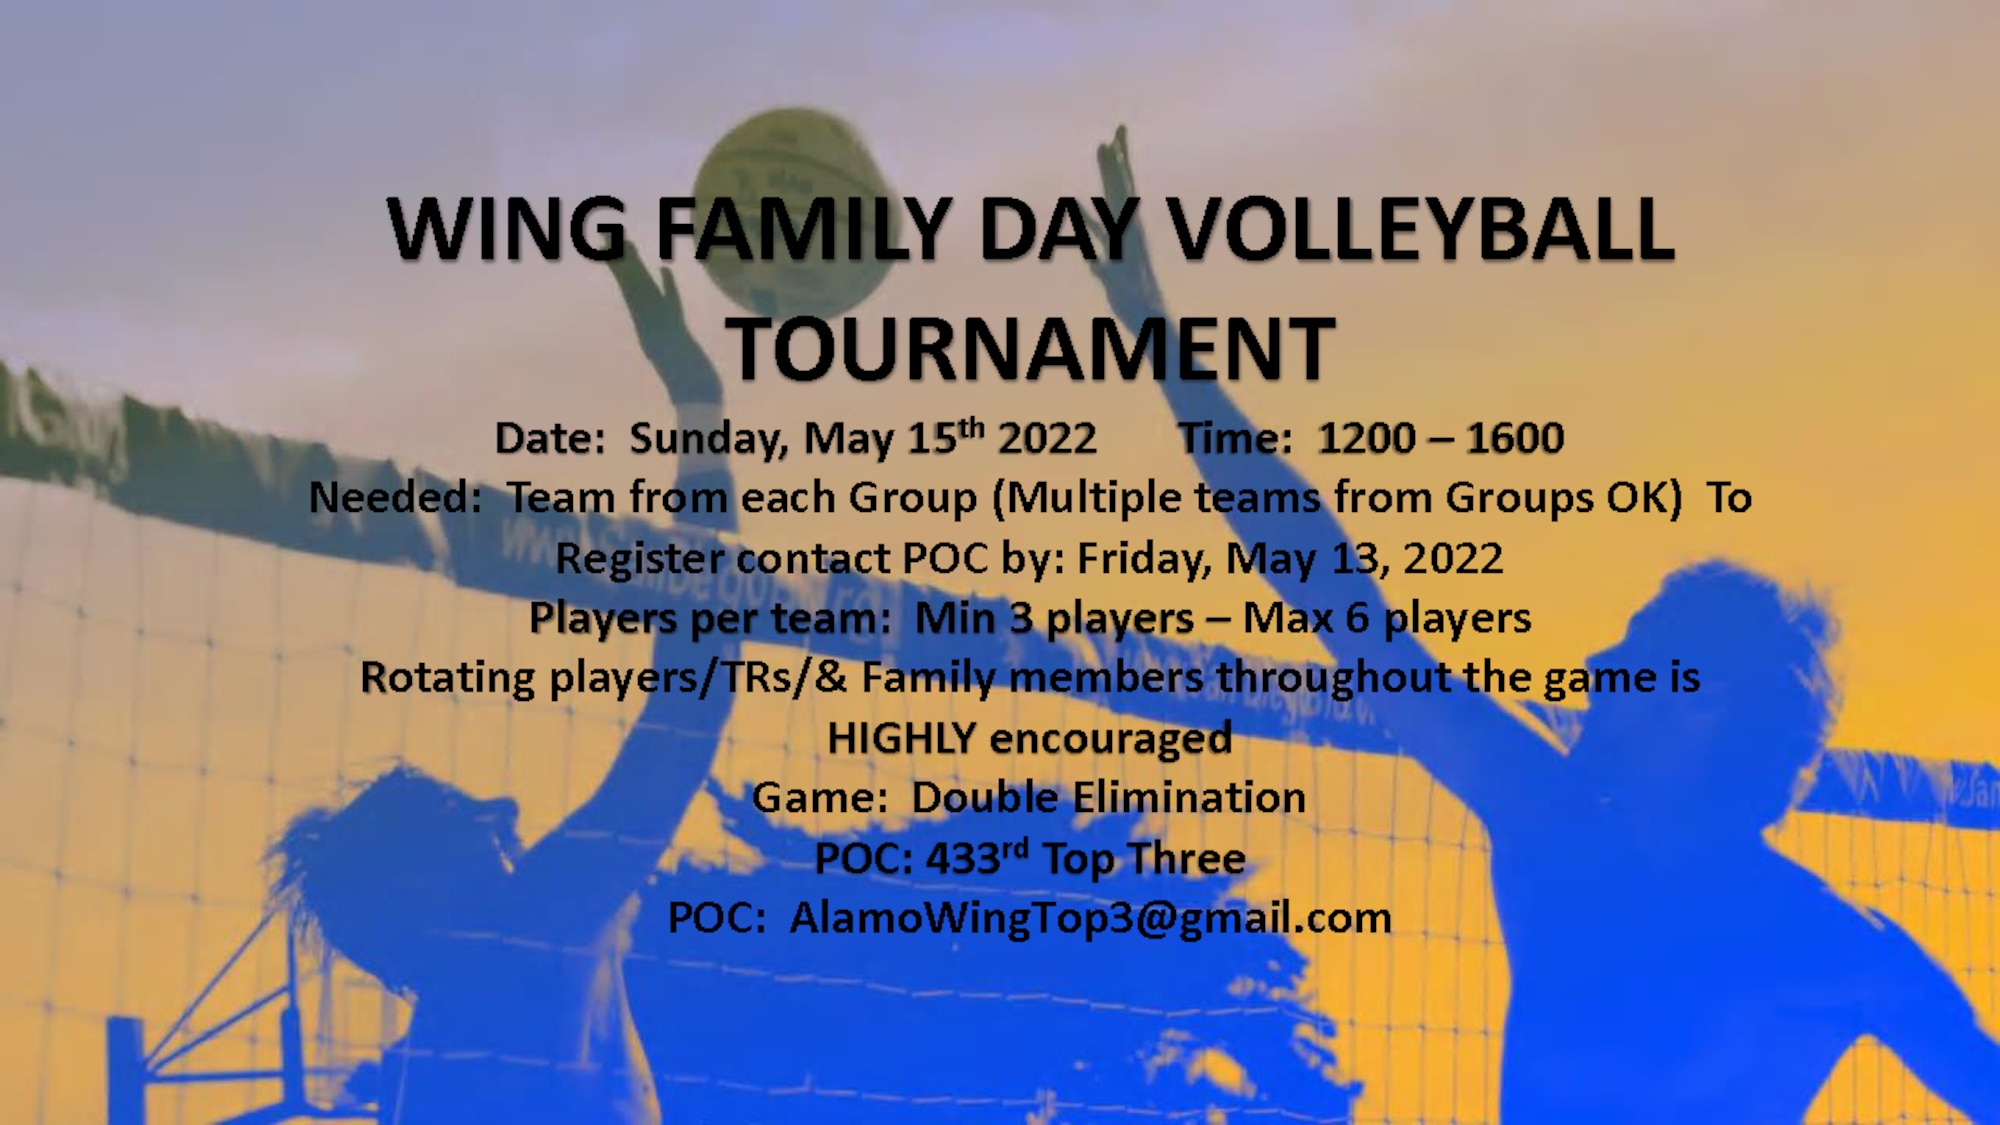 433rd Airlift Wing Family Day volleyball tournament event flyer scheduled at Joint Base San Antonio-Lackland, Texas, May 15, 2022. (U.S. Air Force courtesy image)